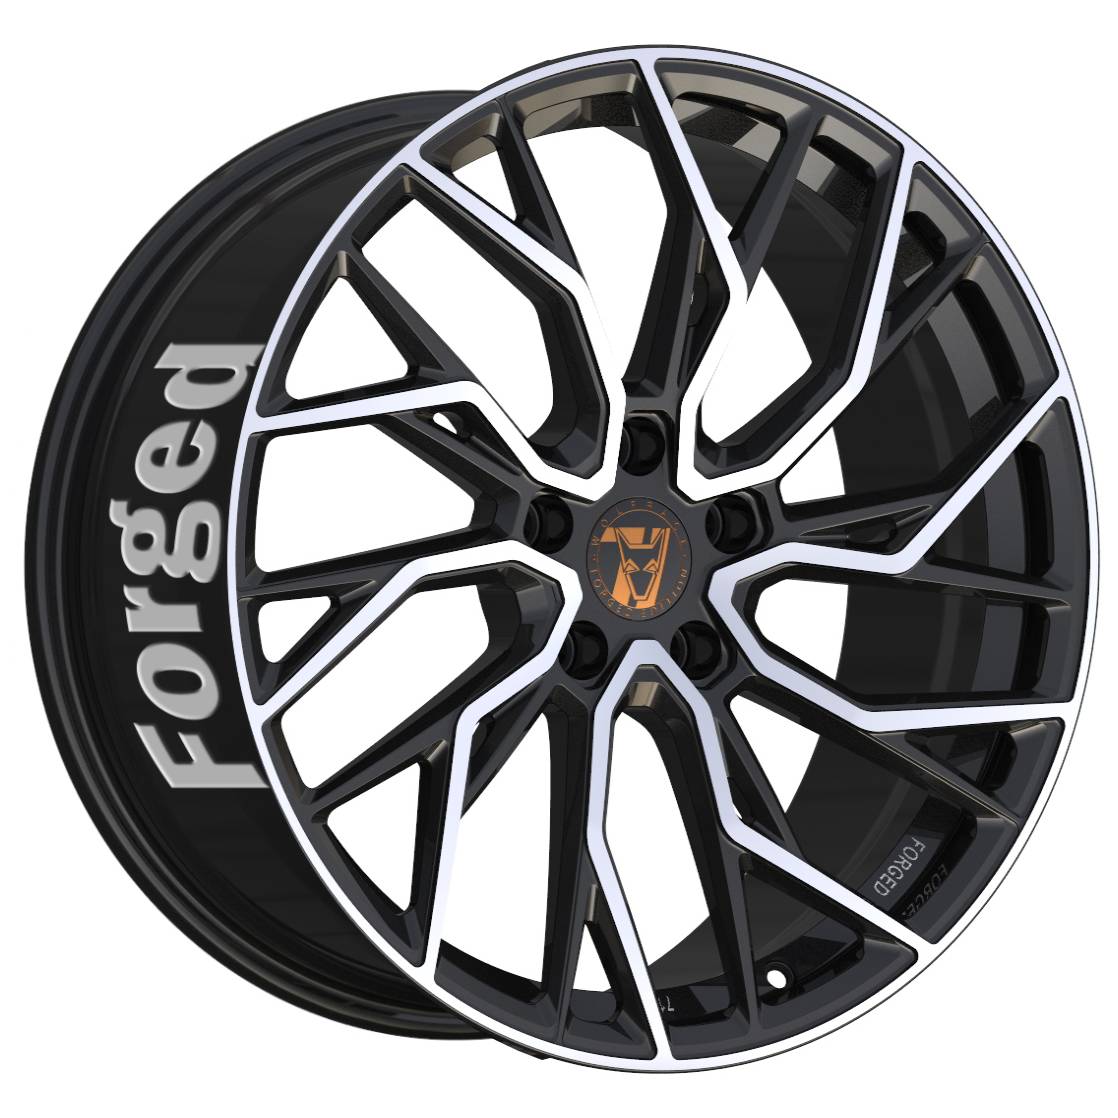 Jantes alu Demon Wheels 71 Forged Edition Voodoo Forged [10x23] -5x114.3- ET 20